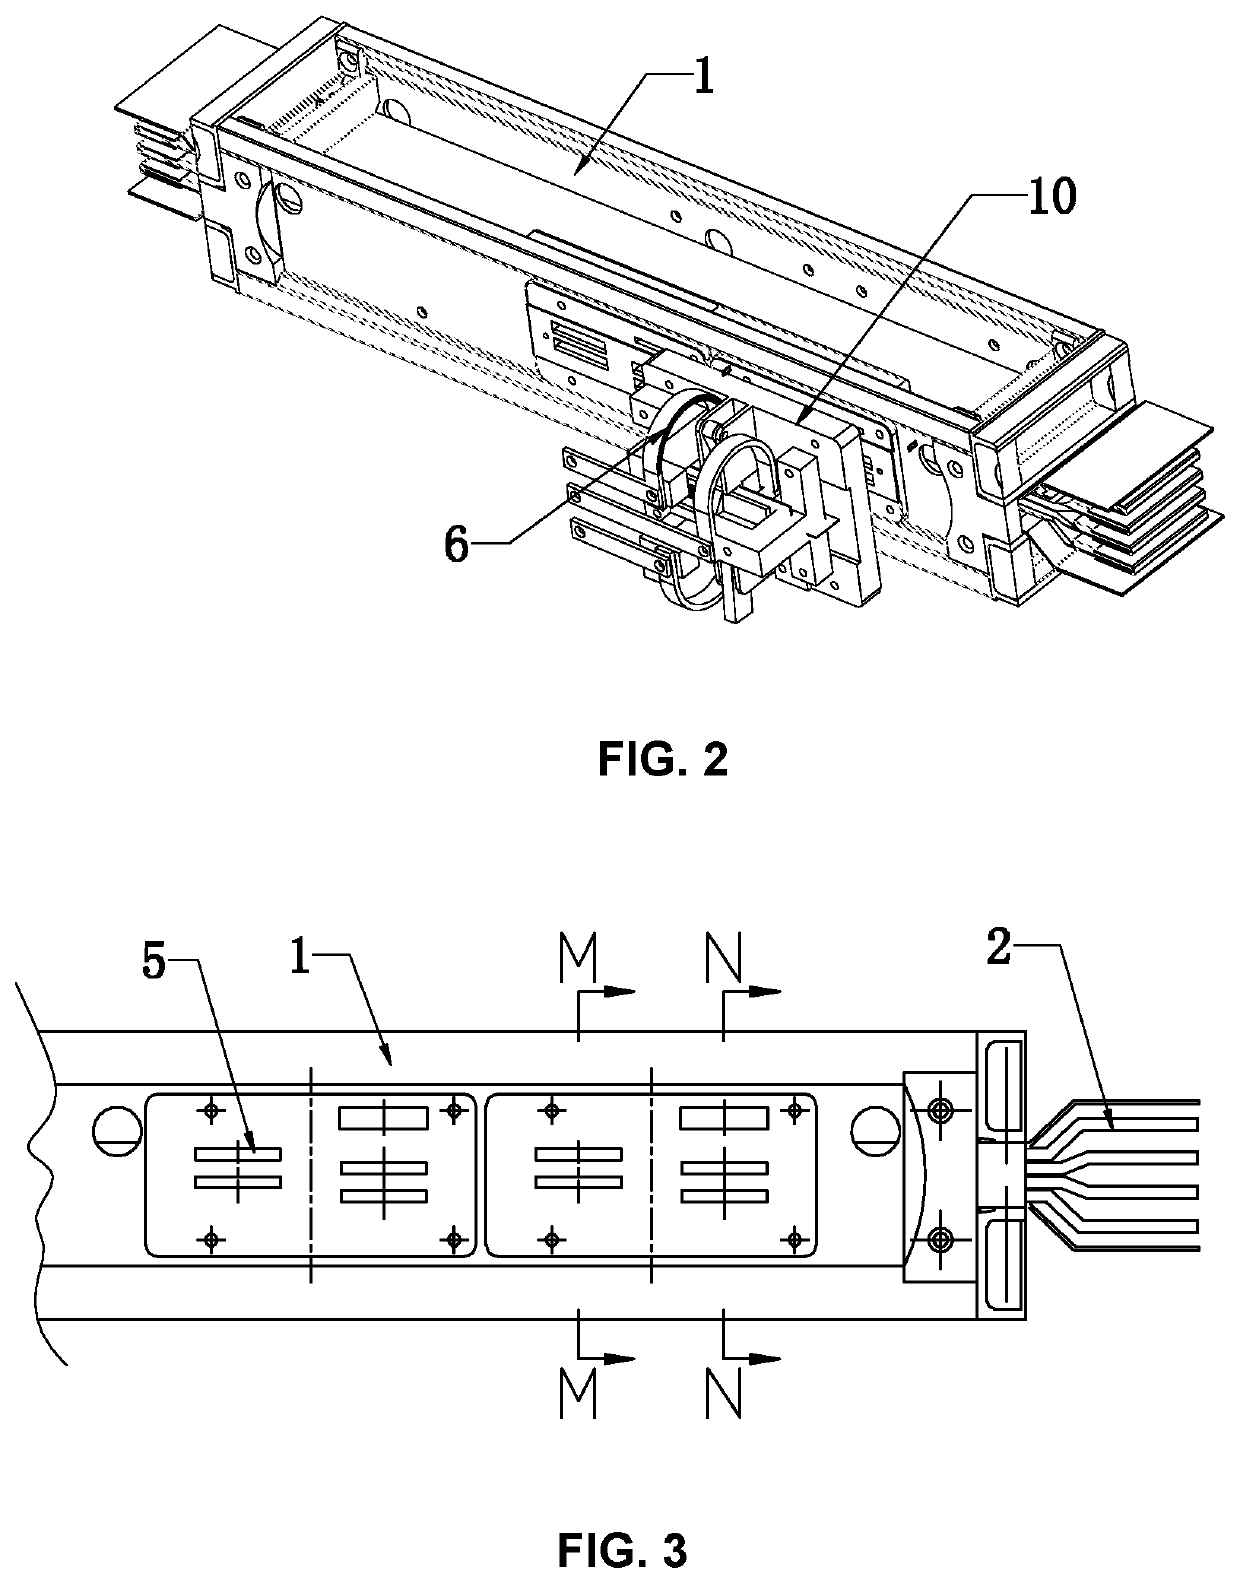 Elastic plug-in jaw structure for tap-off unit and plug-in structure for busbar trunking system